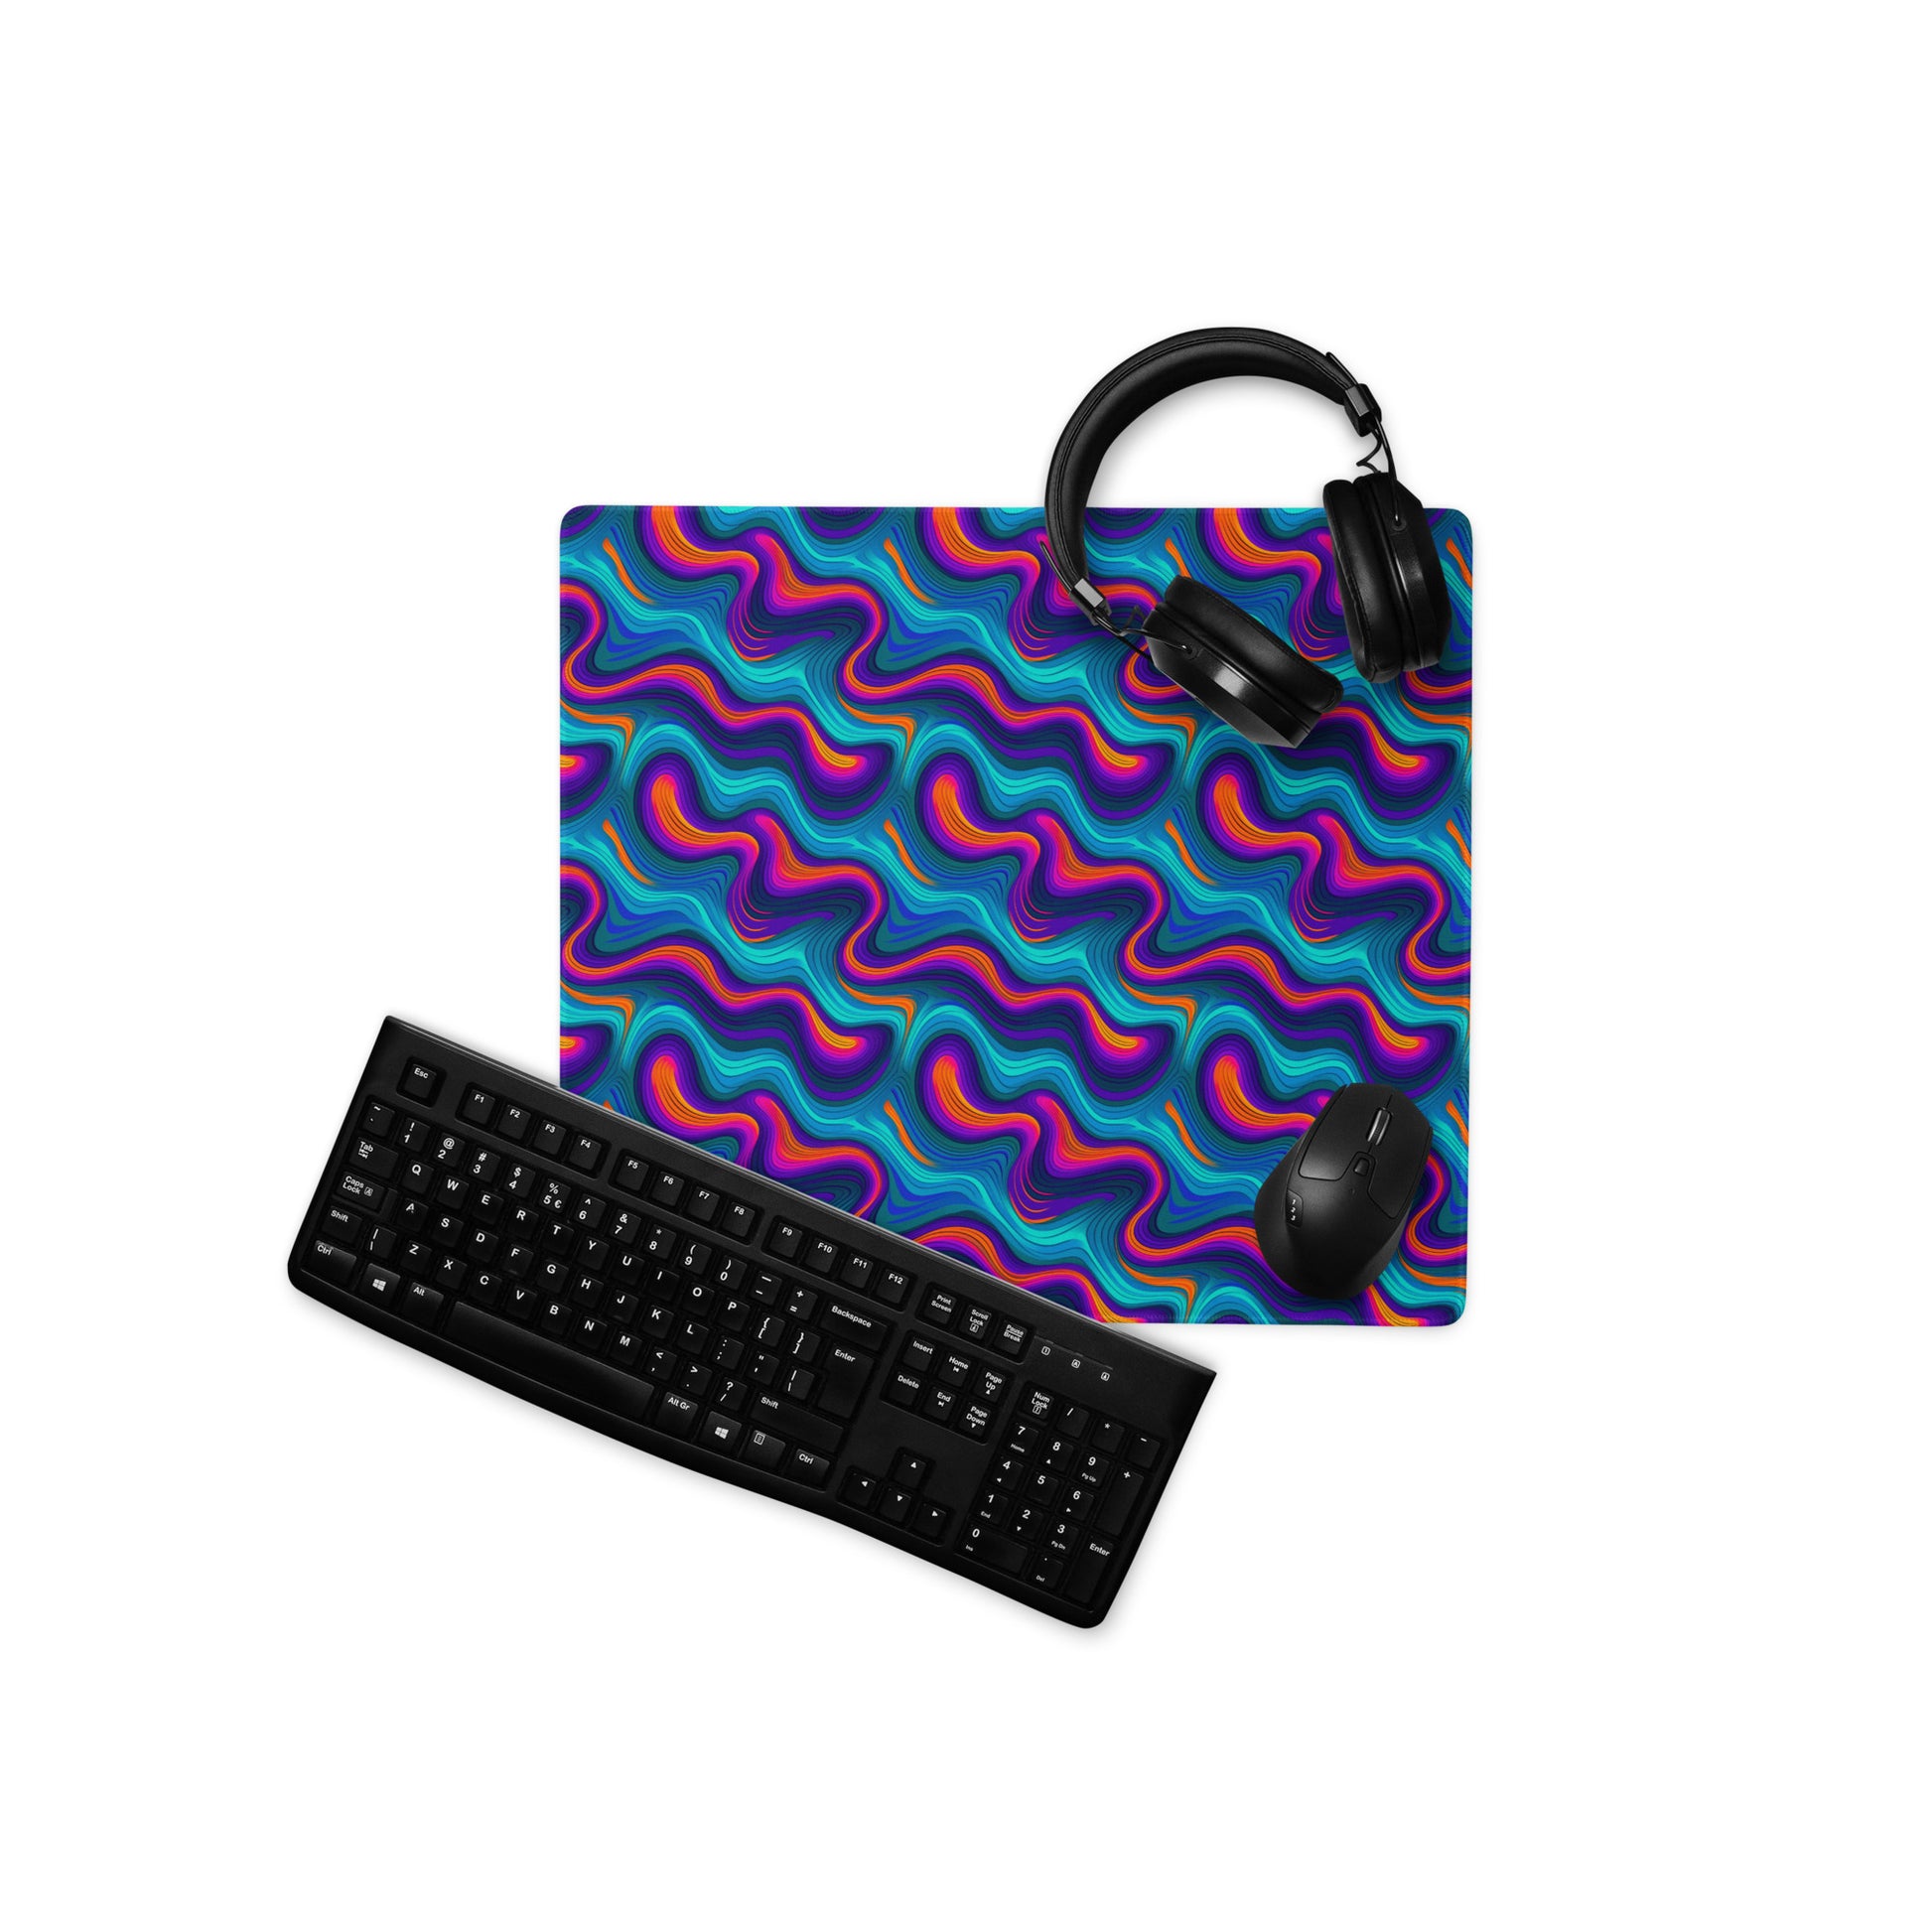 A 18" x 16" desk pad with blue and orange wavy pattern with a keyboard, mouse, and headphones sitting on it.